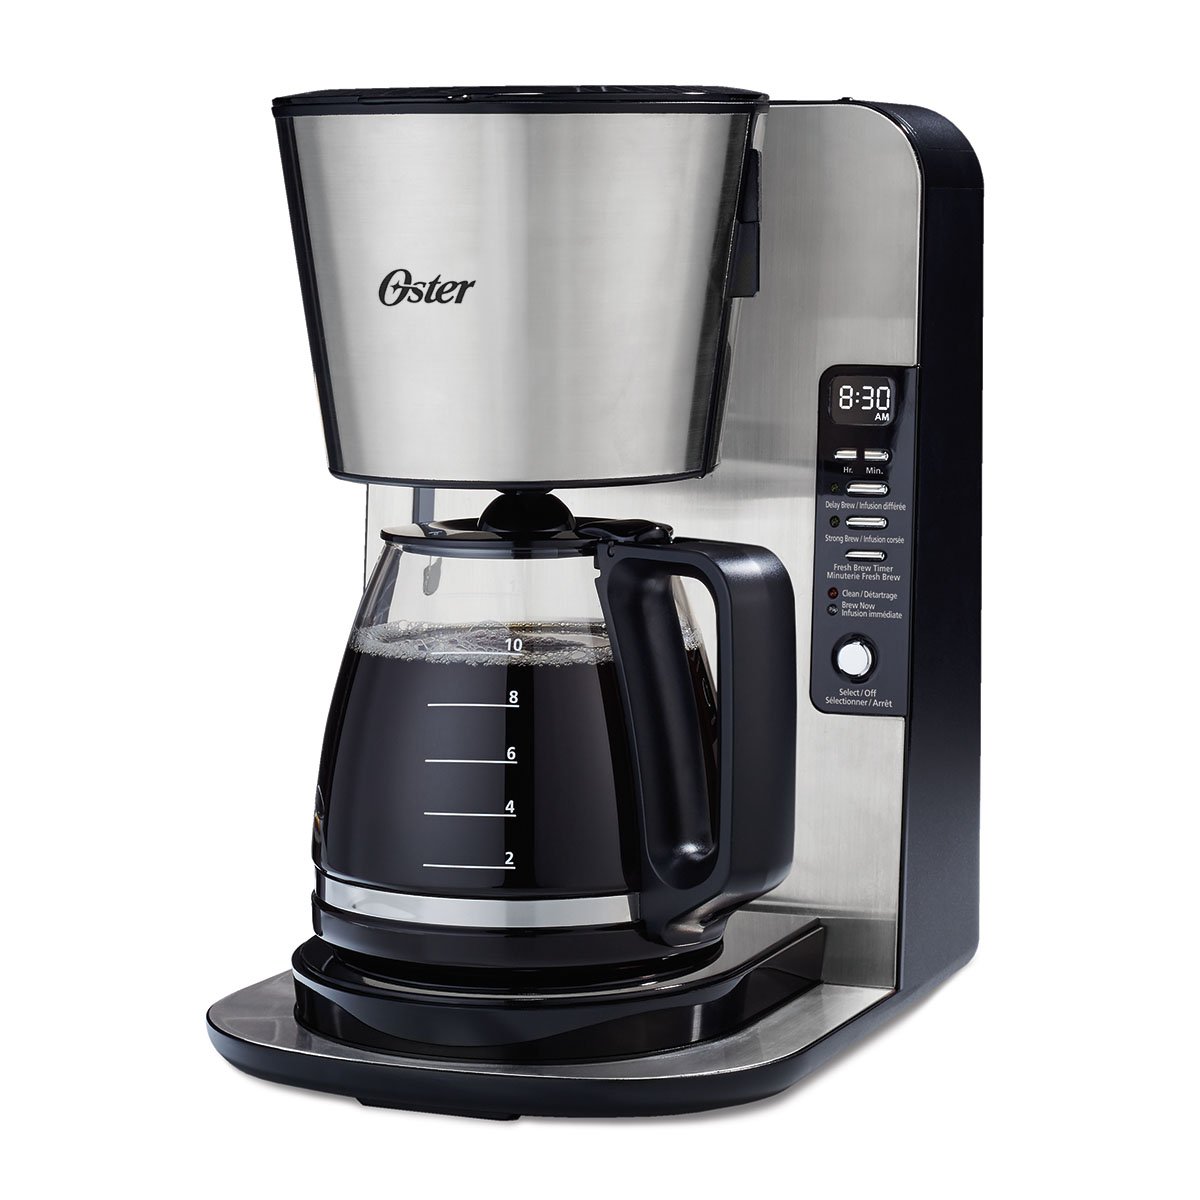 oster 12 cup coffee maker manual